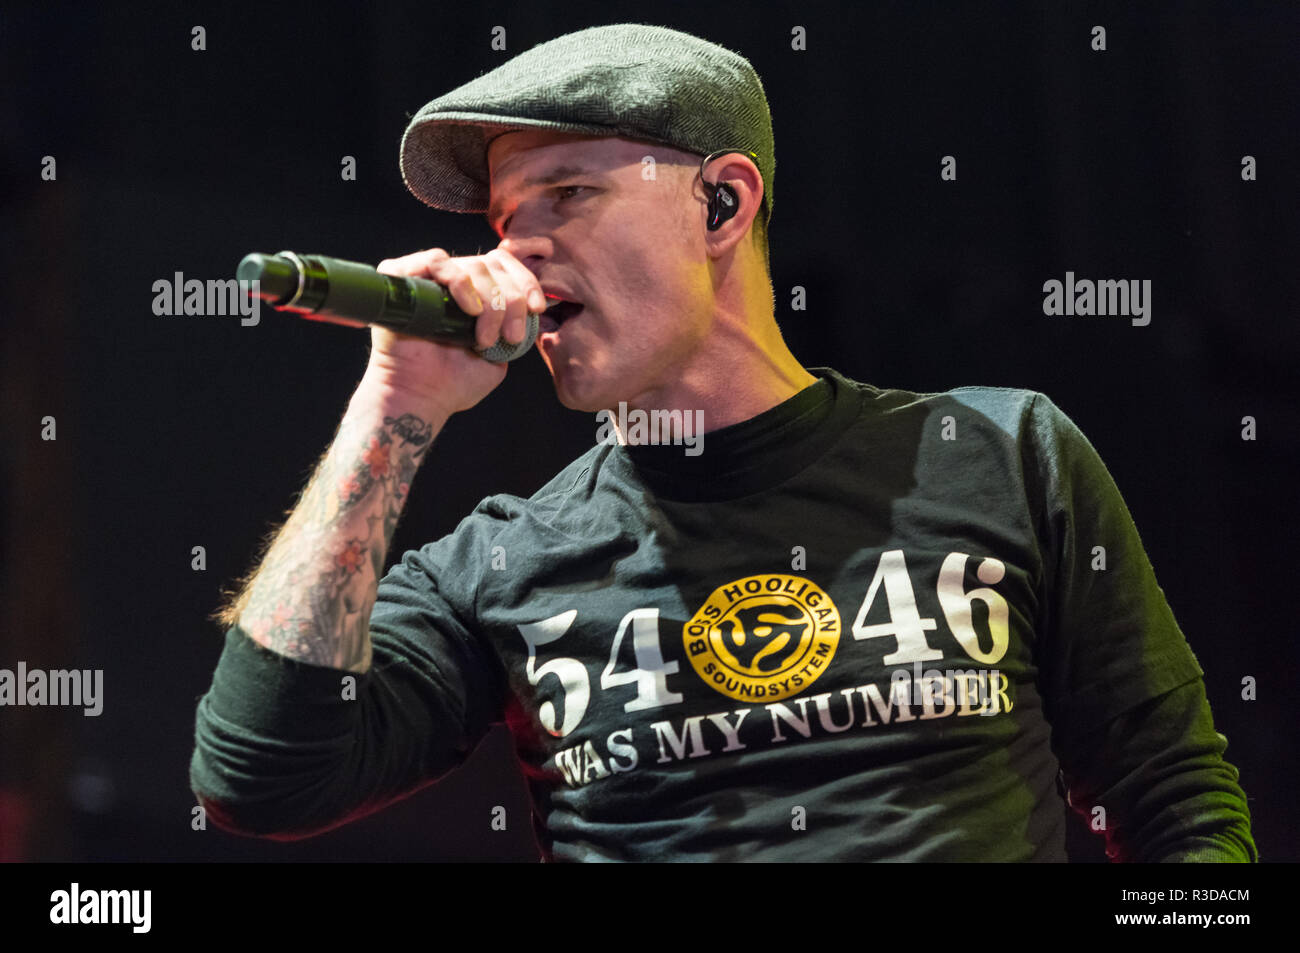 All Barr, lead singer for the Dropkick Murphys, singing for the